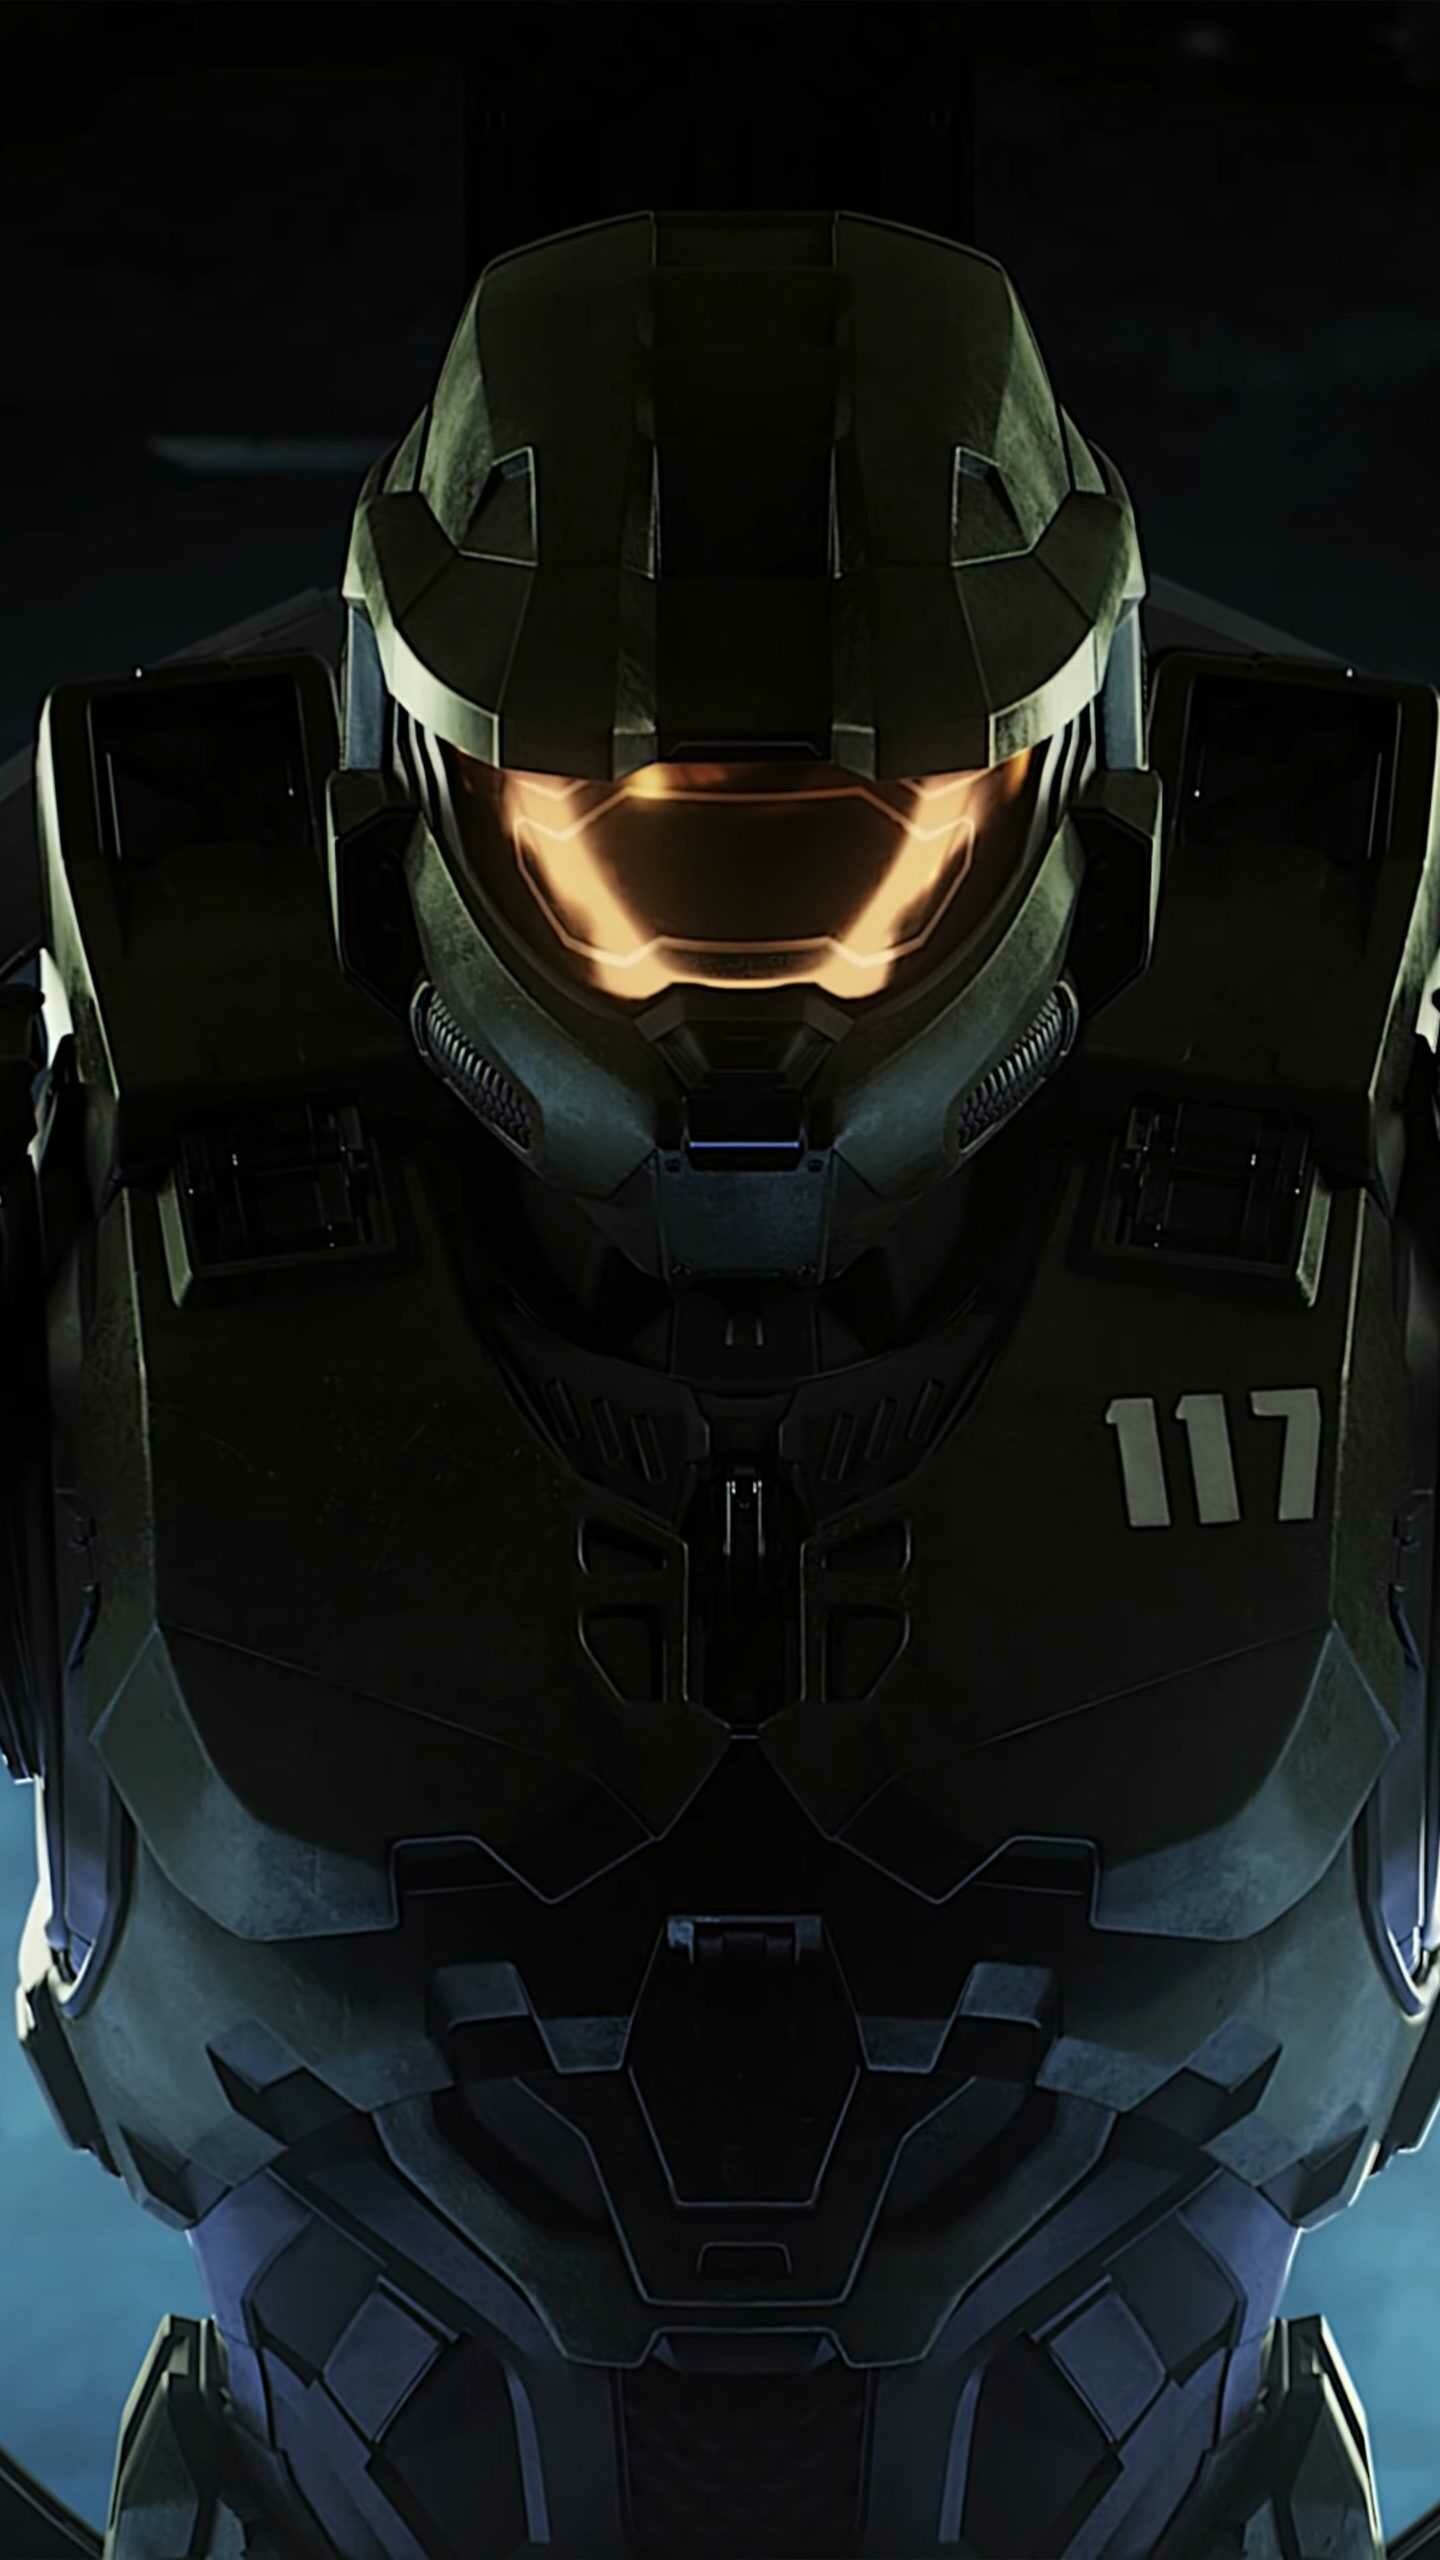 Halo: The Master Chief serves as a mascot for the franchise and the Xbox brand. 1440x2560 HD Background.